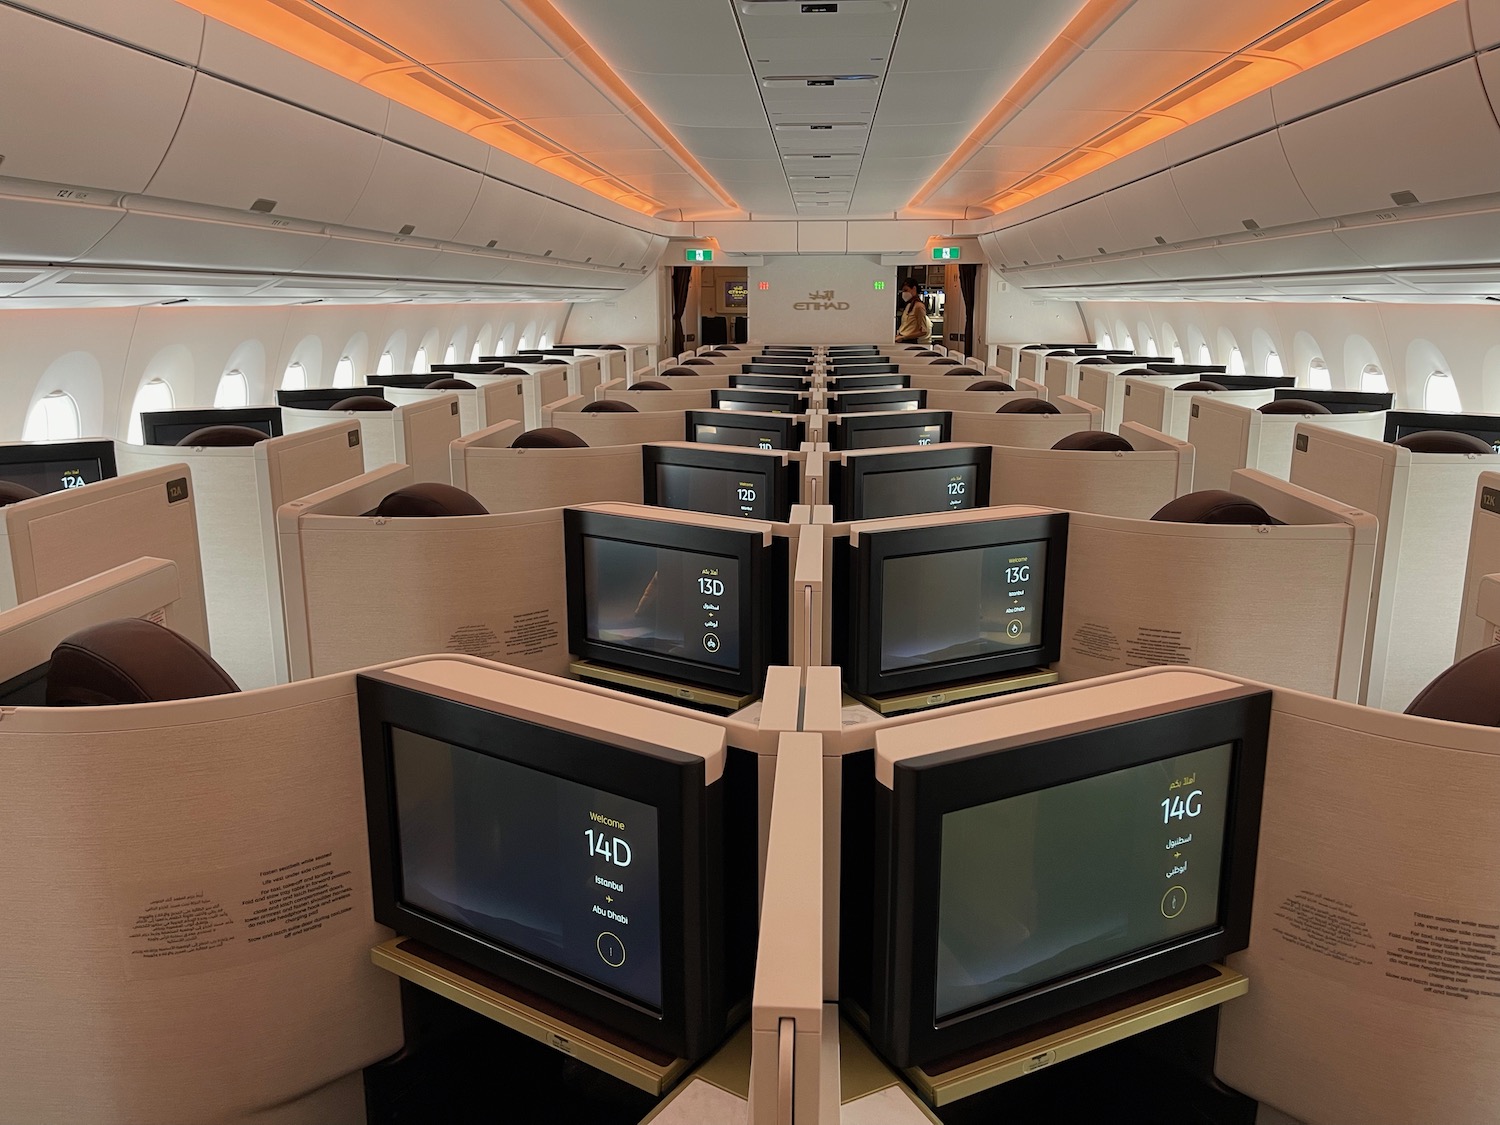 a row of monitors in an airplane